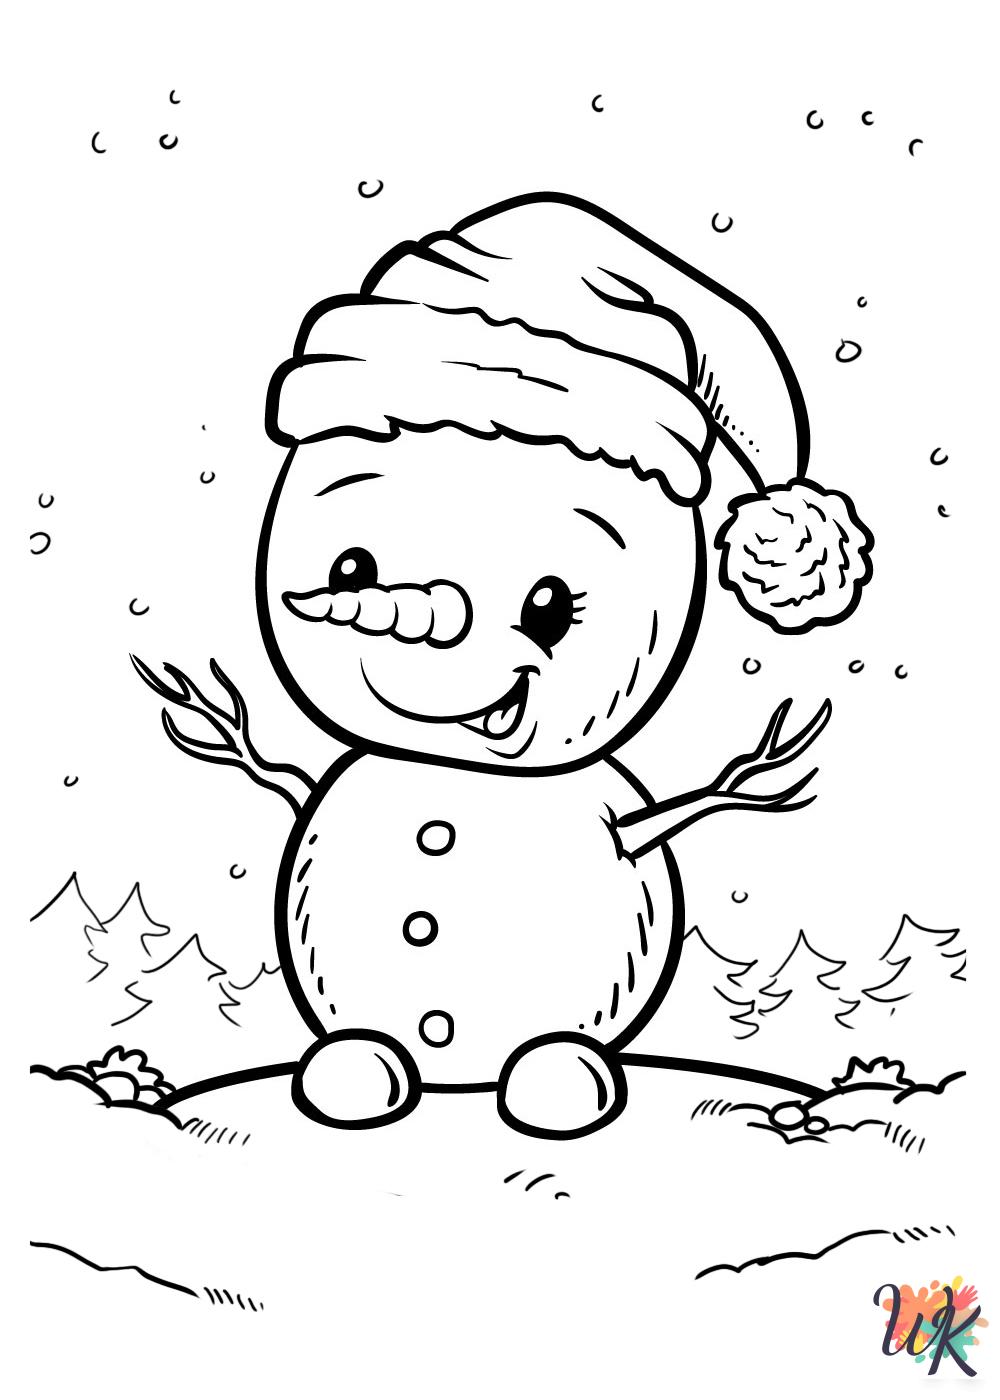 Snowman coloring pages for adults easy